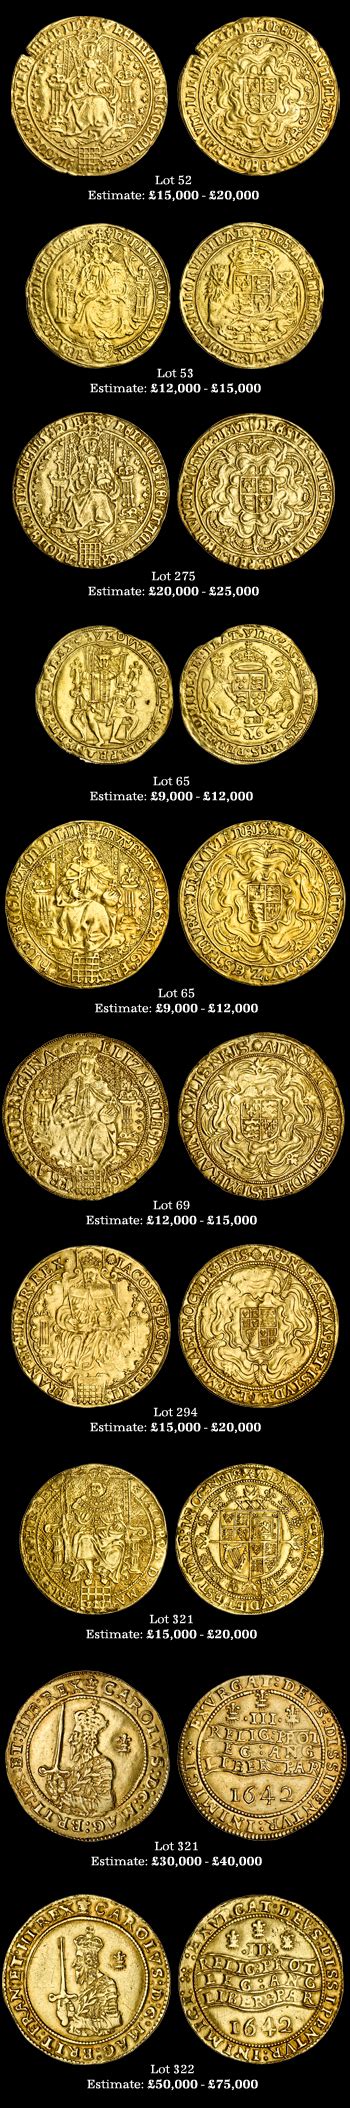 spink  auction exceptional anglo saxon english medieval gold coins